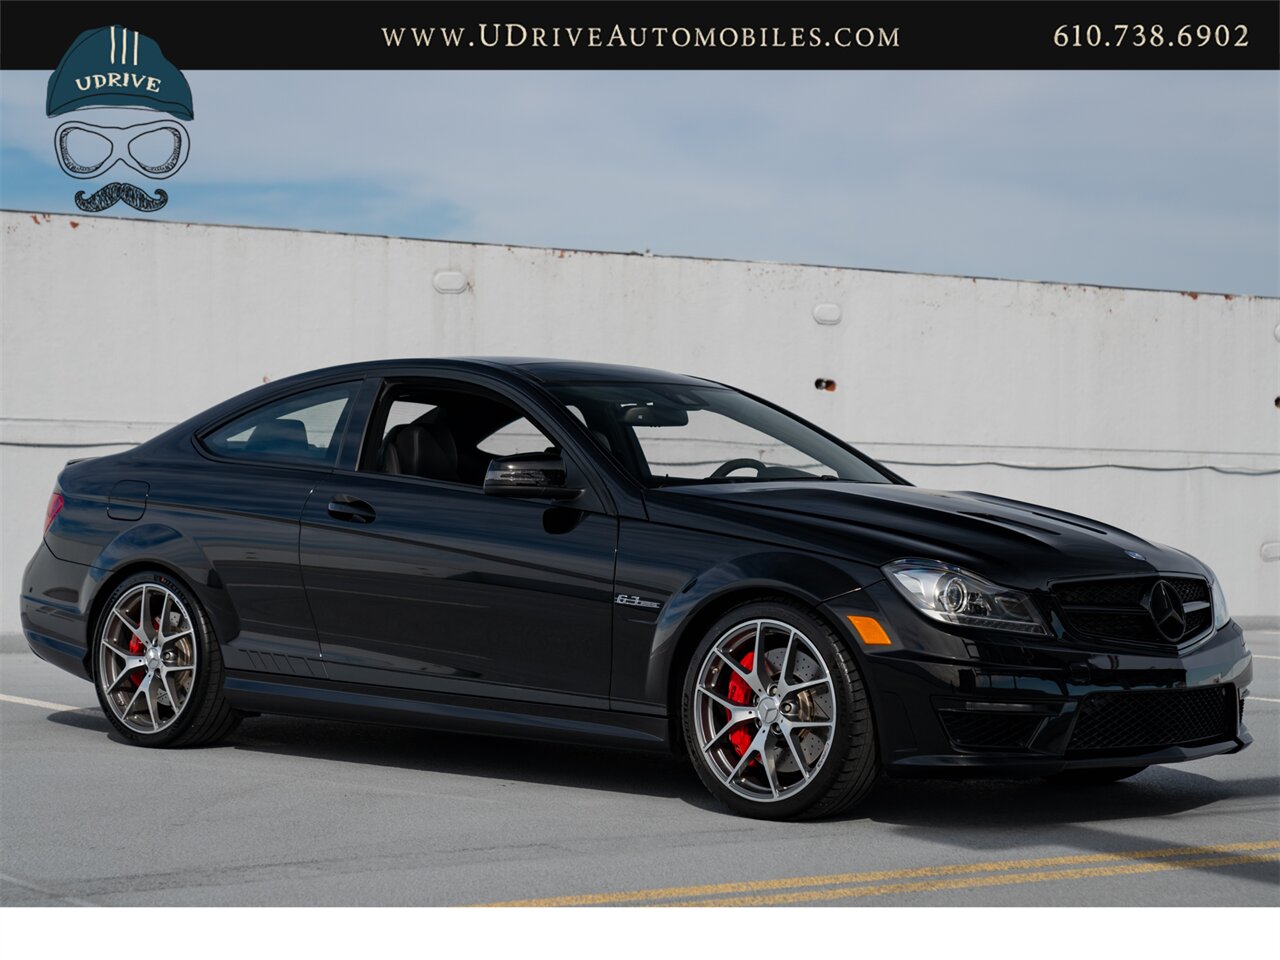 2015 Mercedes-Benz C63 AMG  Edition 507 17k Miles Pano Sunroof Locking Diff 507hp - Photo 15 - West Chester, PA 19382